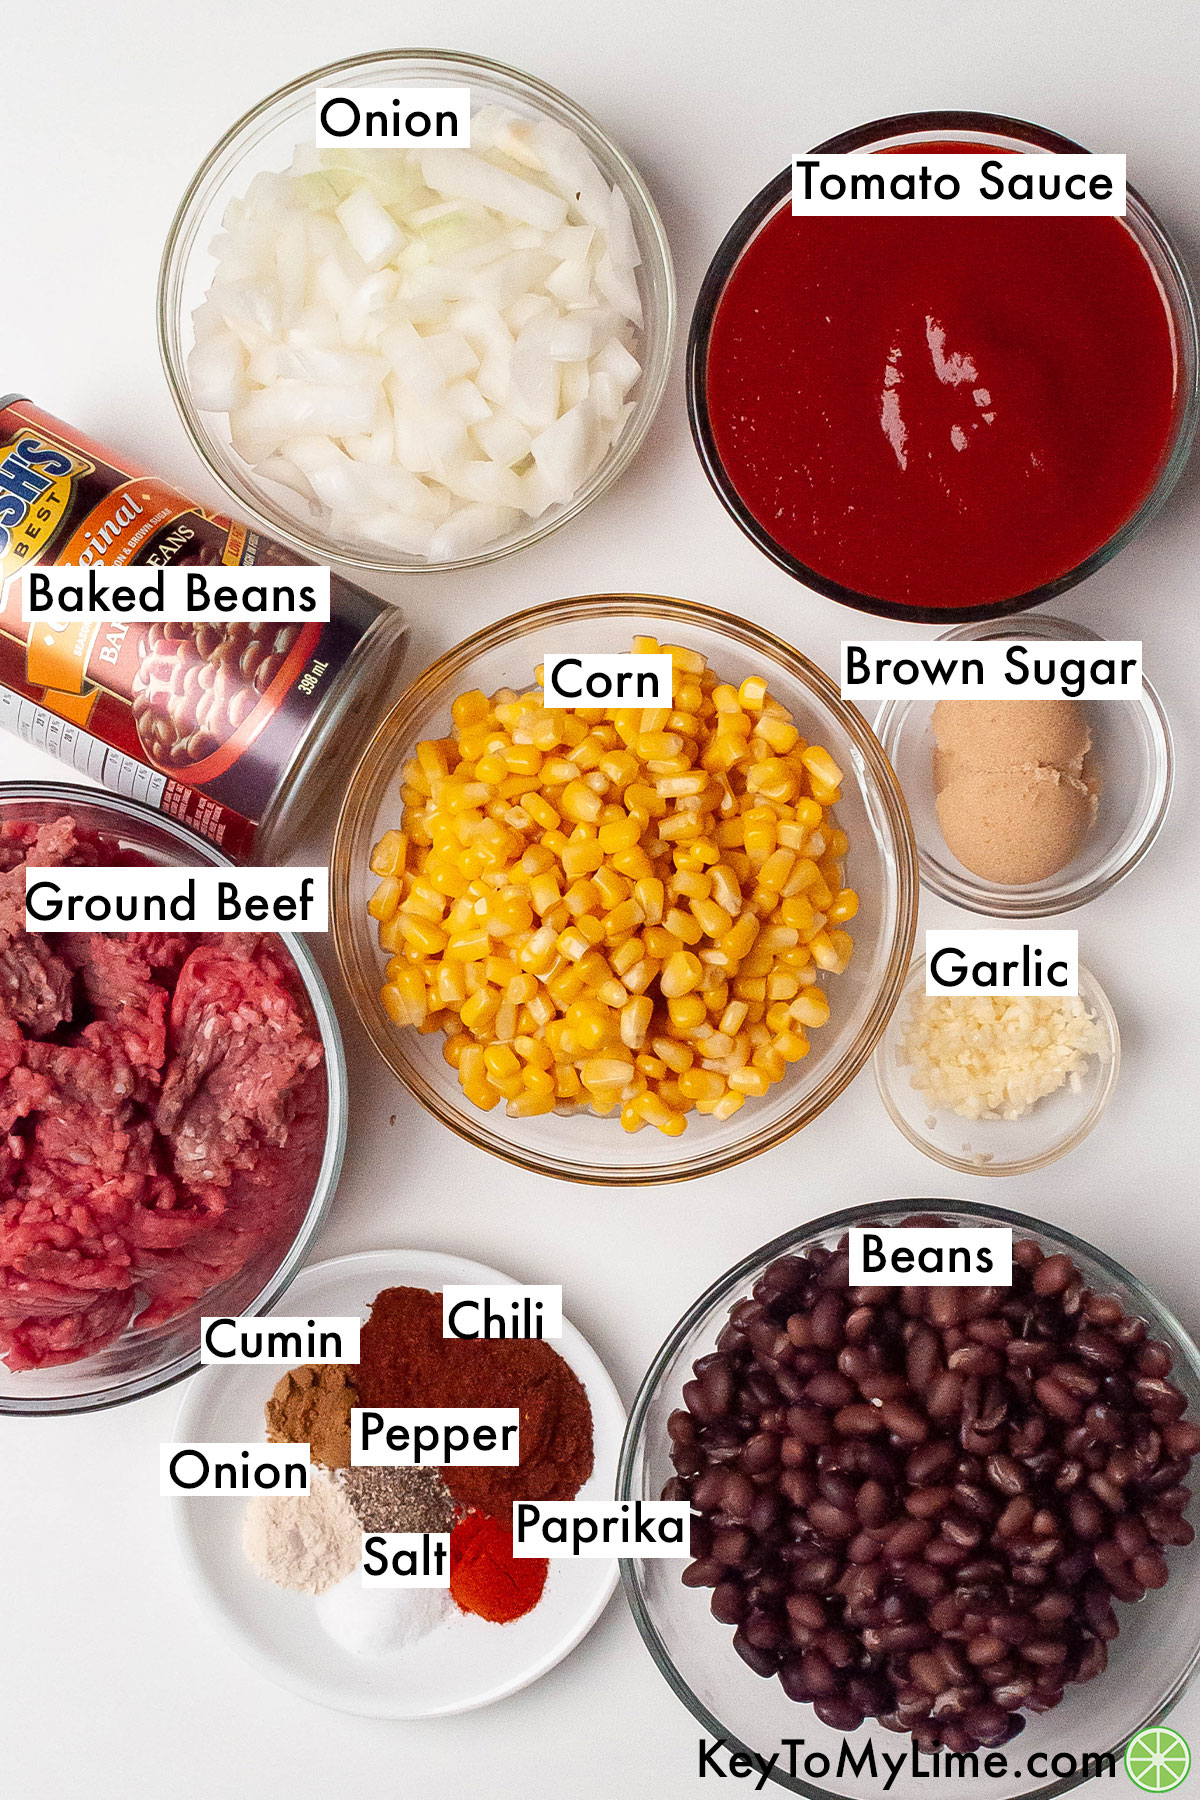 The labeled ingredients for sweet chili.